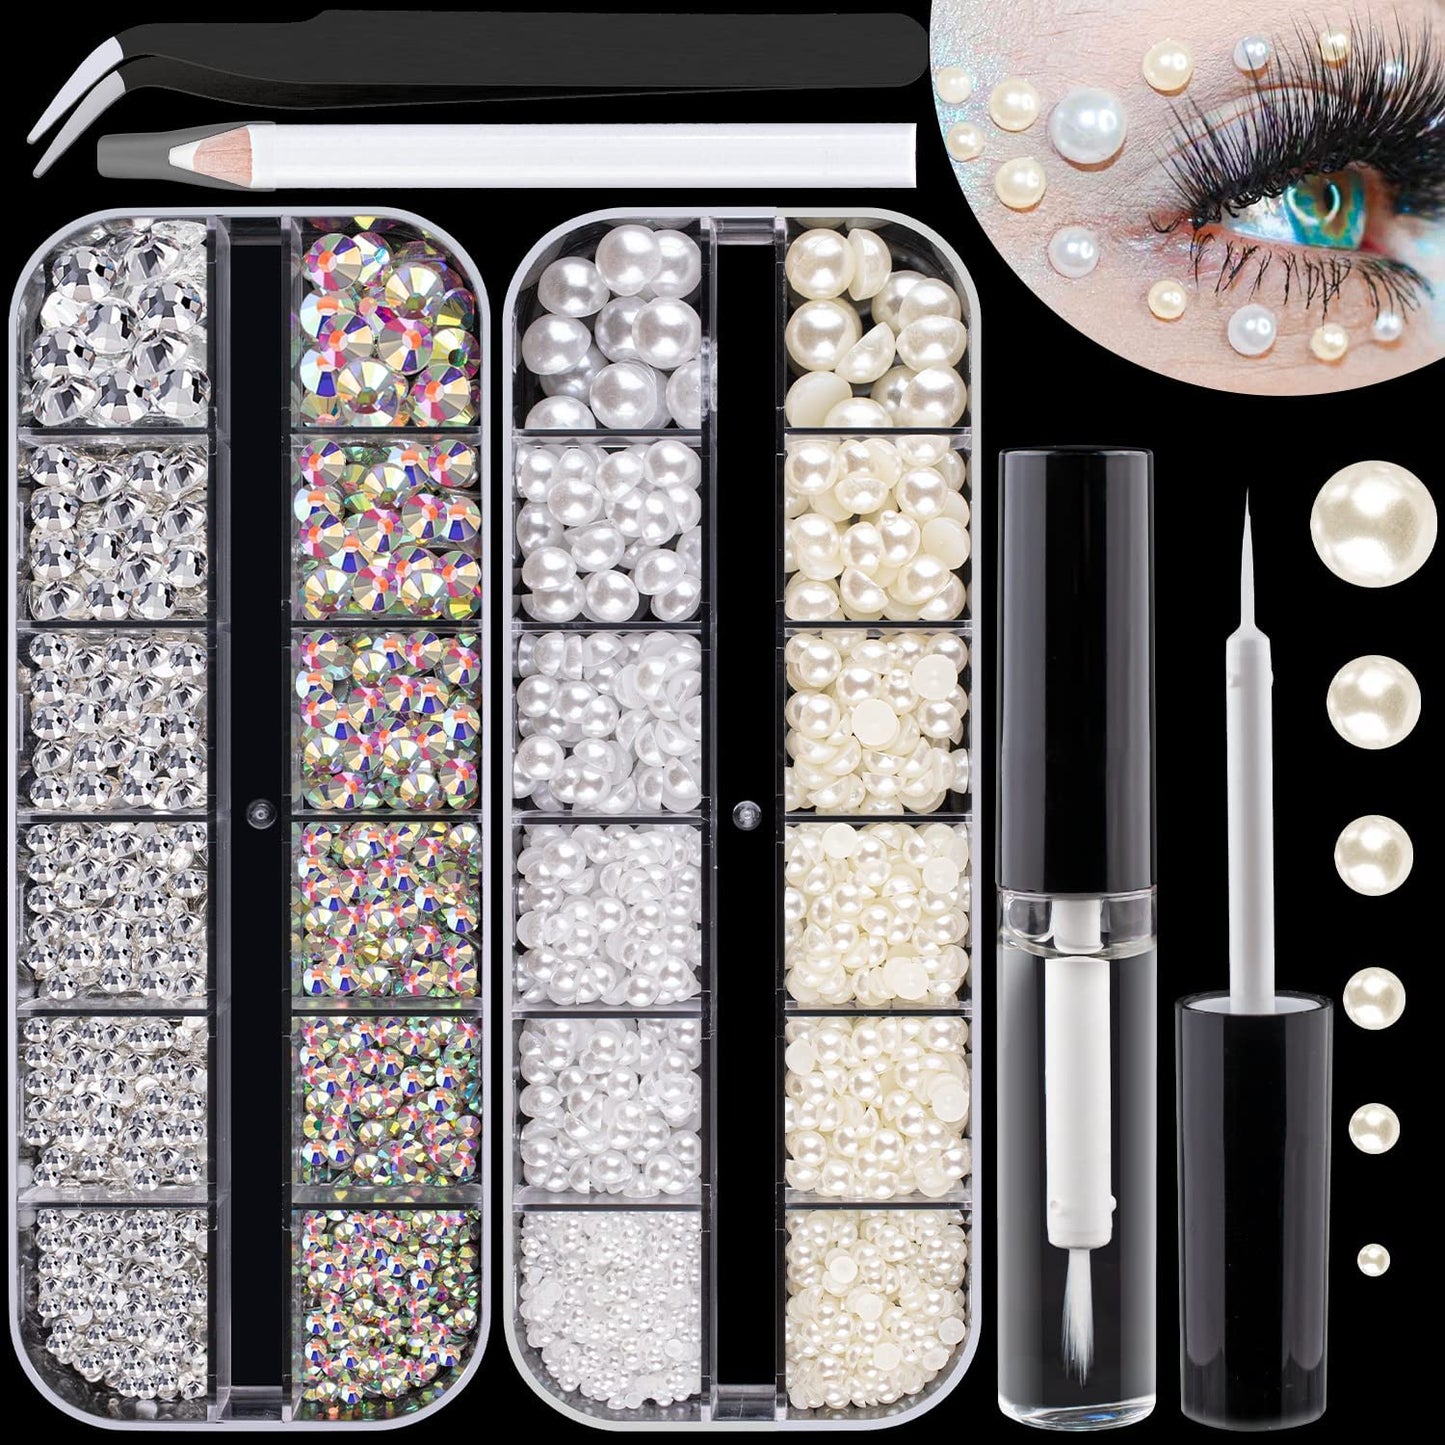 Flat Back Rhinestones&Pearls Kits Round Glass Crystal AB&Transparent White Gems+White&Beige Pearls With Quick Dry Makeup Glue+Picker Pencil+Tweezer For Nail Art And Face Eye Body Make-up